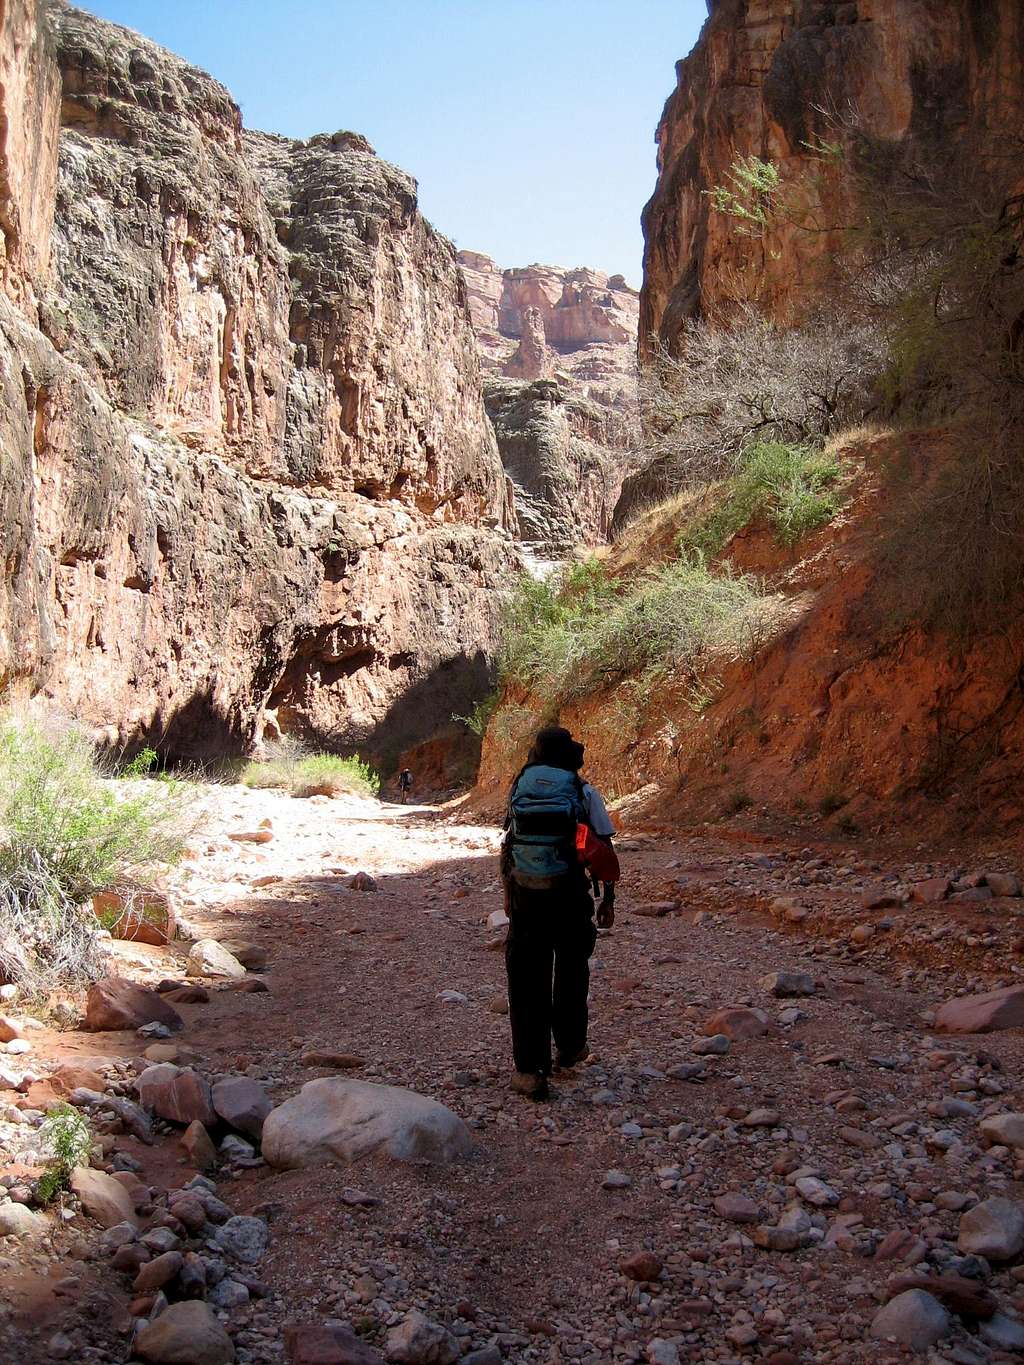 Walking into Carbonate Canyon